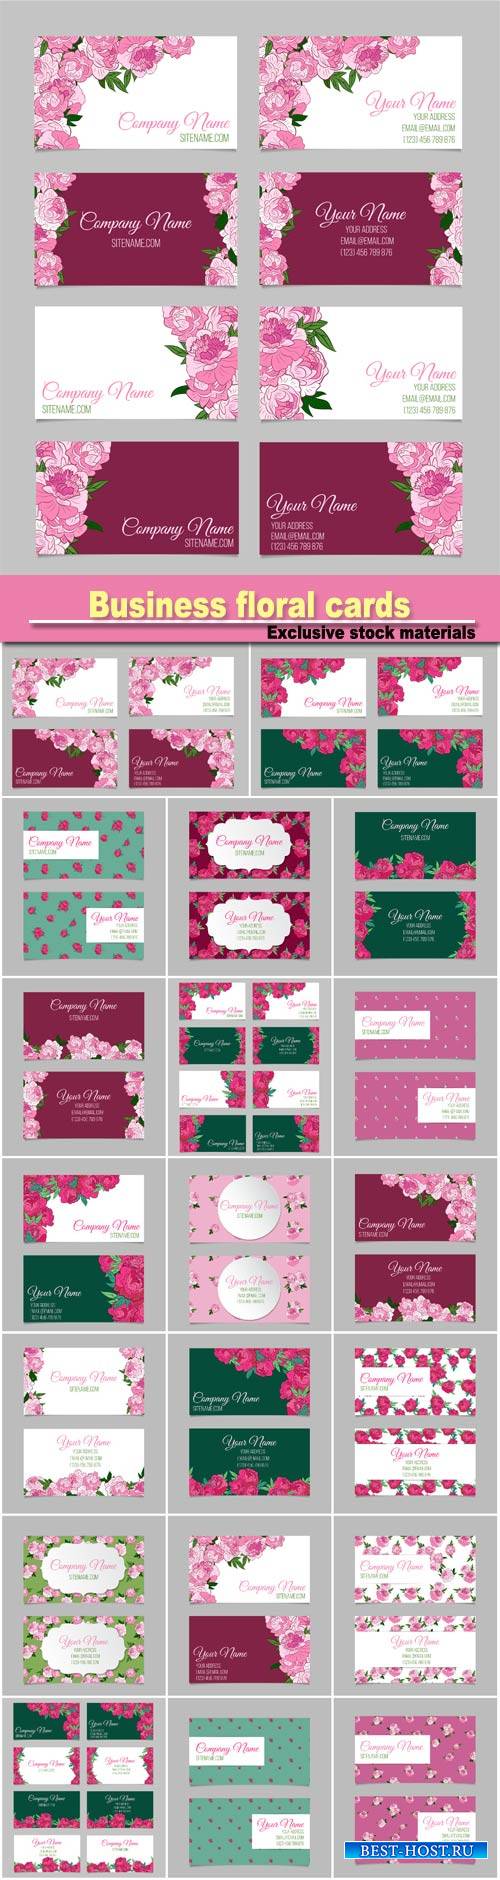 Business cards with floral design